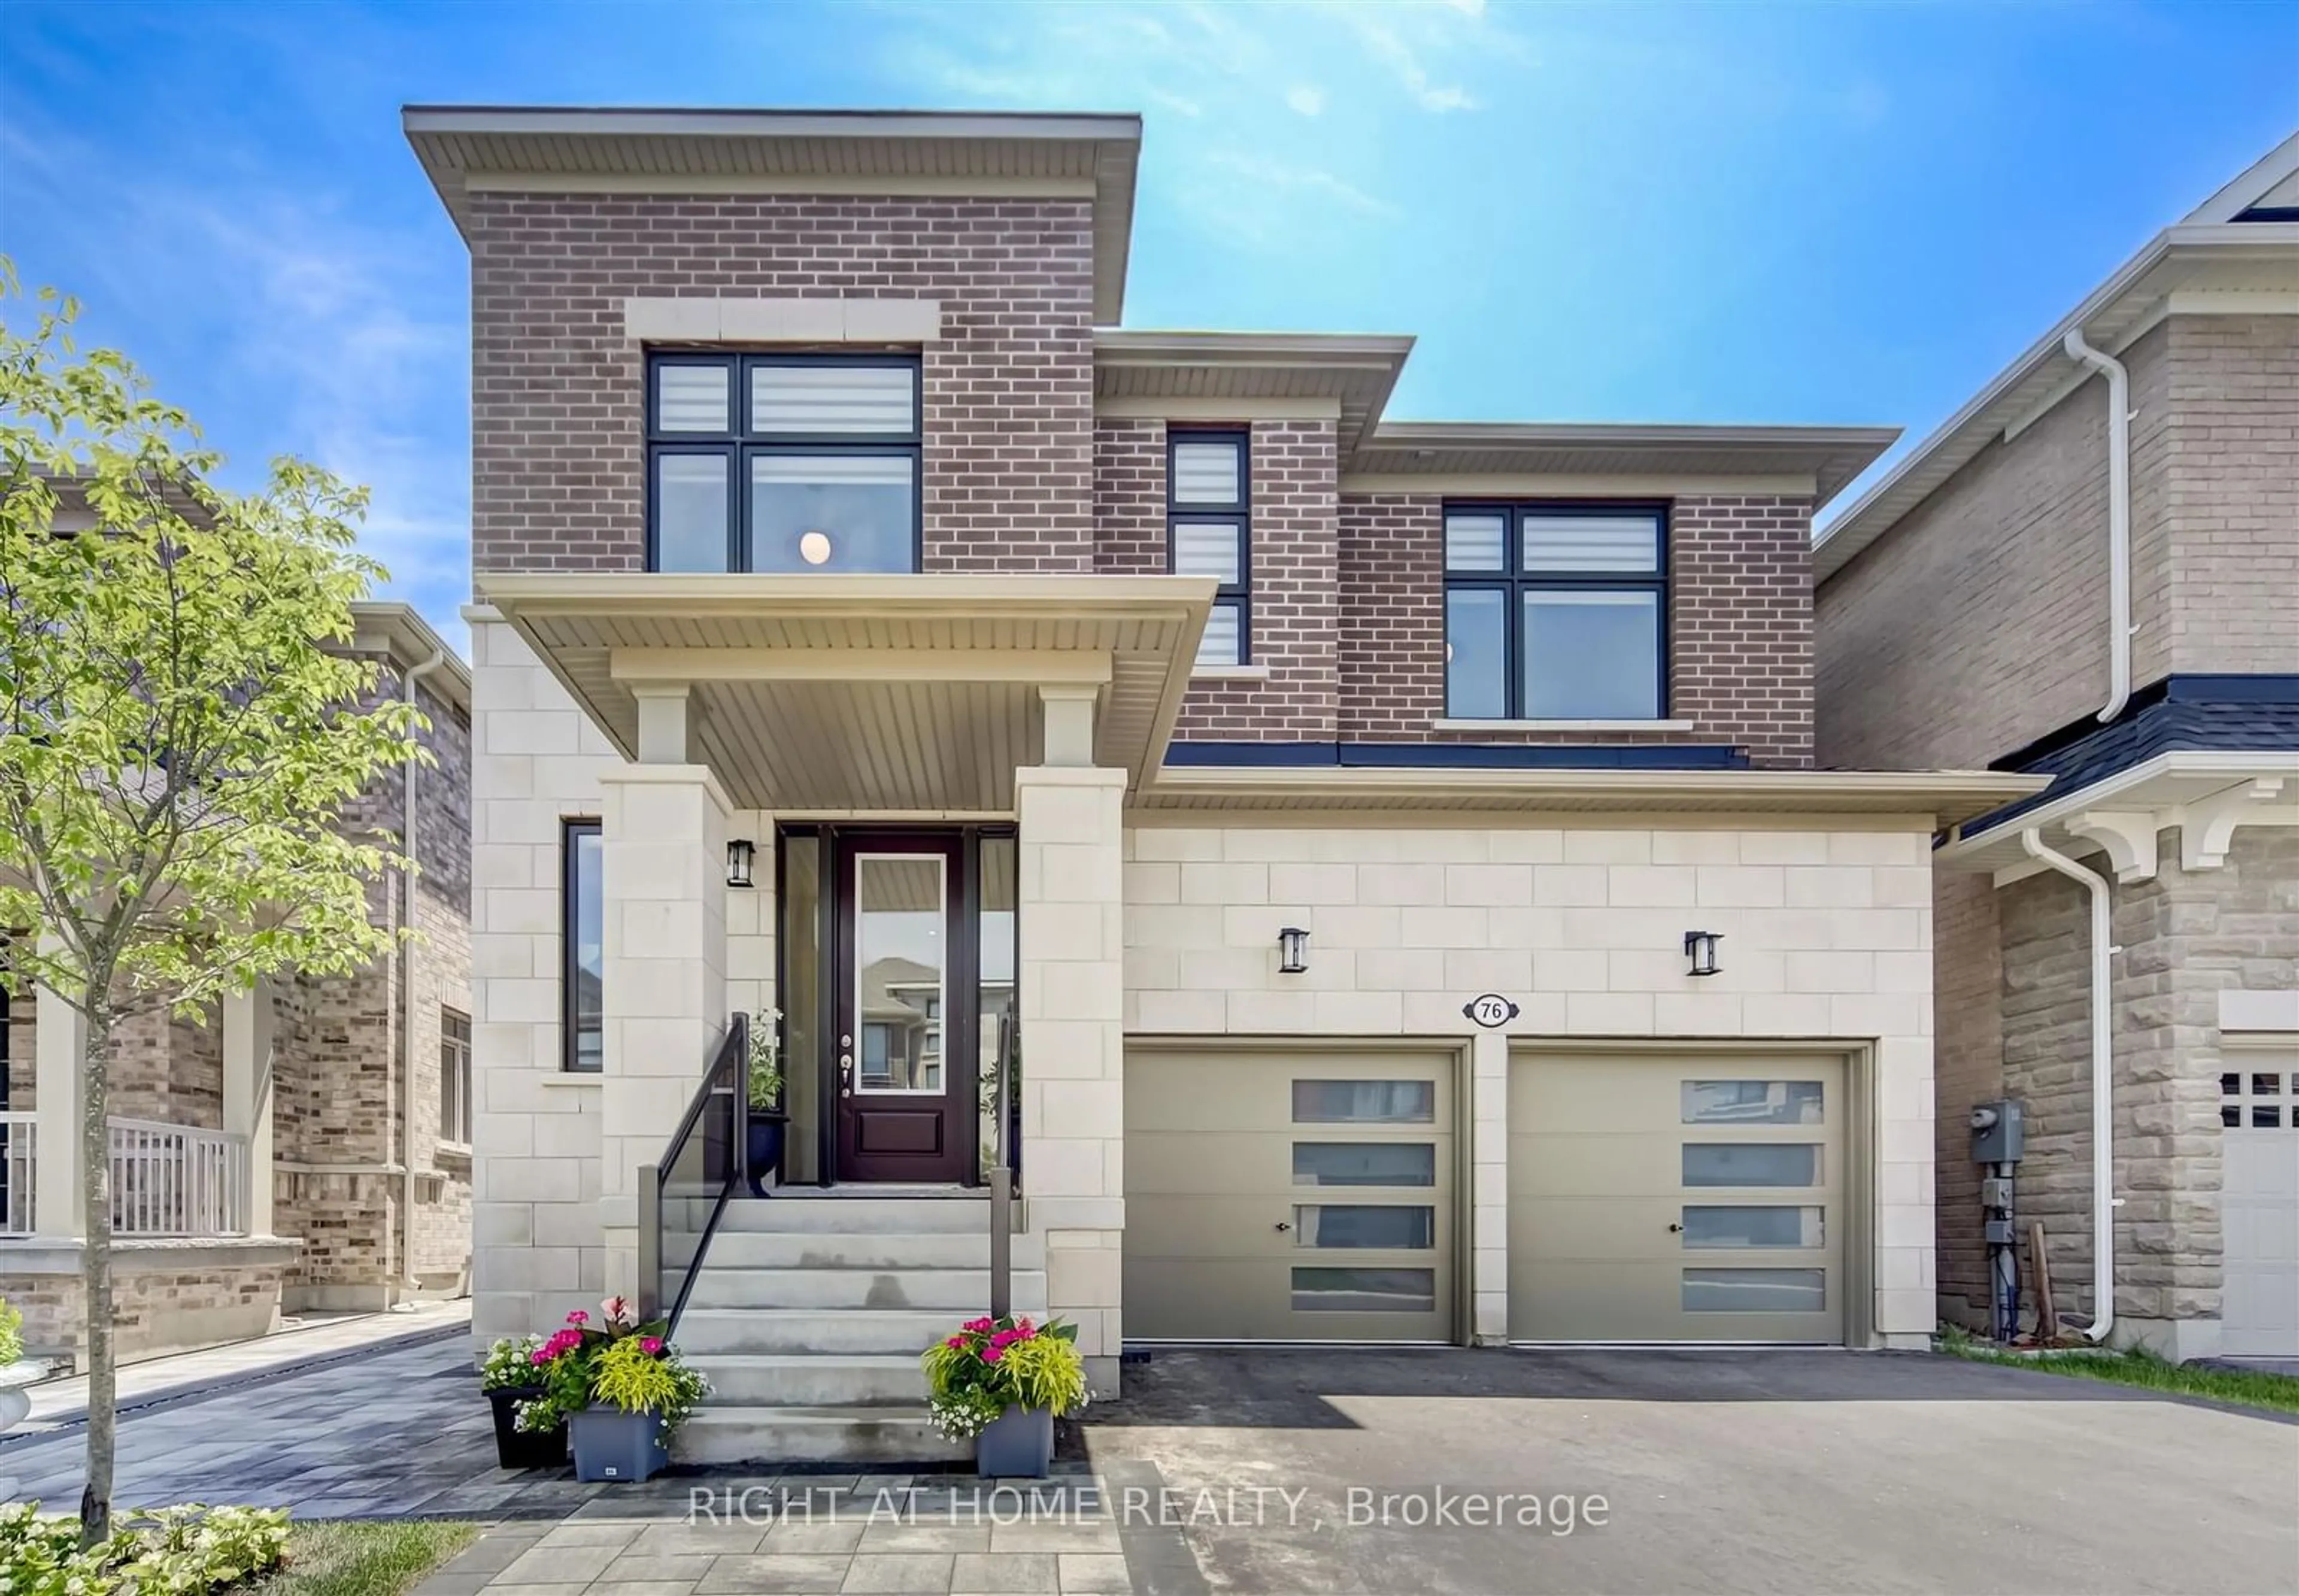 Home with brick exterior material for 76 Maple Fields Circ, Aurora Ontario L4G 6J1